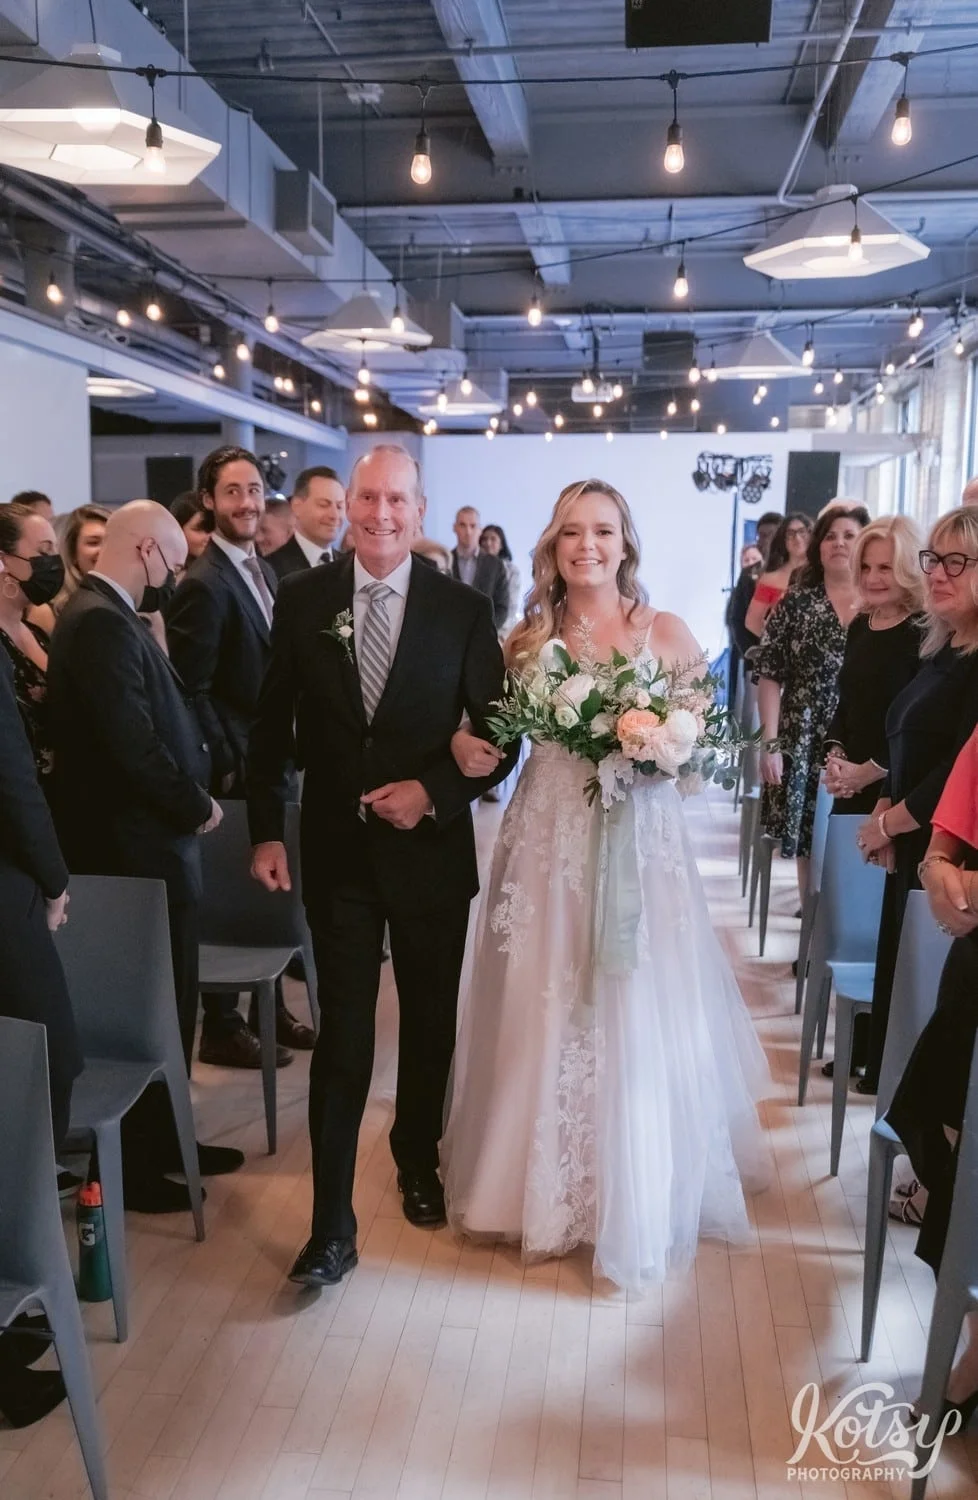 A vertical shot of a bride in a white bridal gown holding a flower bouquet walks down the aisle with her father during her Second Floor Events wedding ceremony in Toronto, Canada